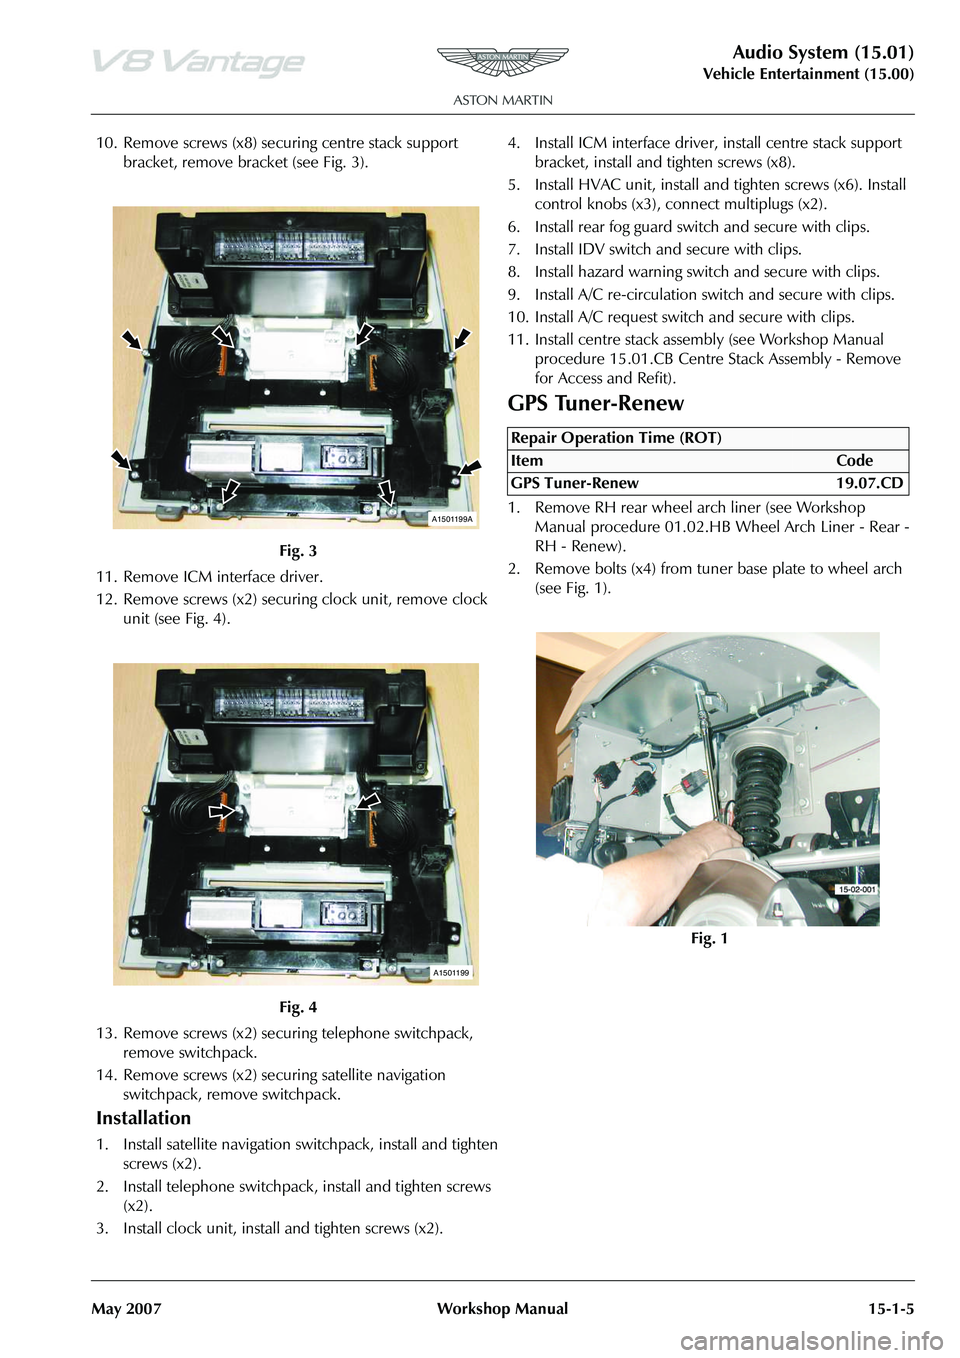 ASTON MARTIN V8 VANTAGE 2010  Workshop Manual Audio System (15.01)
Vehicle Entertainment (15.00)
May 2007 Workshop Manual 15-1-5
10. Remove screws (x8) secu ring centre stack support 
bracket, remove bracket (see Fig. 3).
11. Remove ICM interface